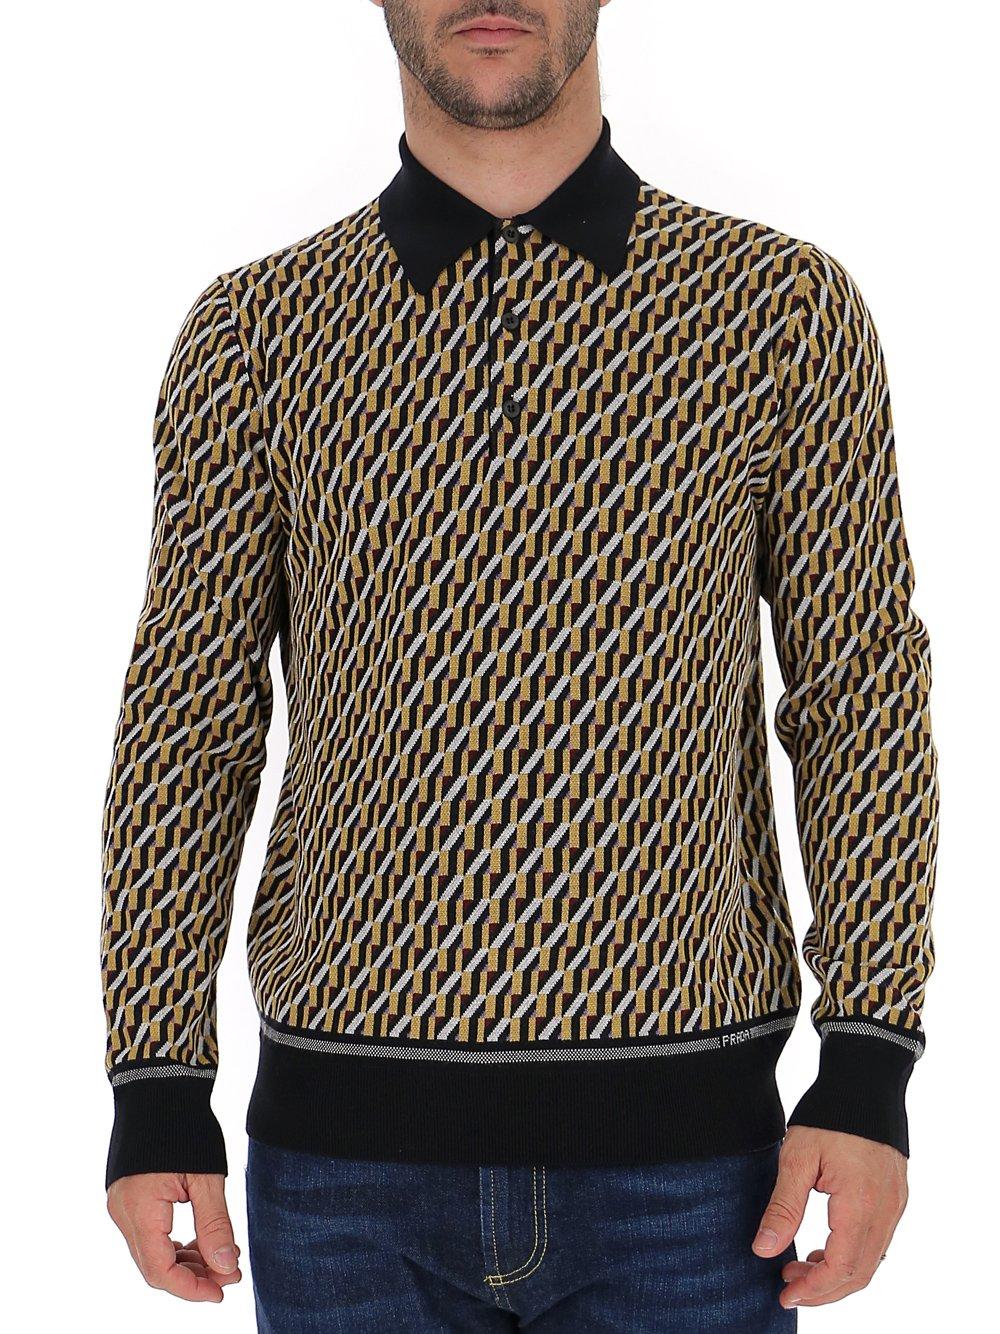 Prada Wool Intarsia Knitted Long-sleeve Polo Shirt for Men - Lyst